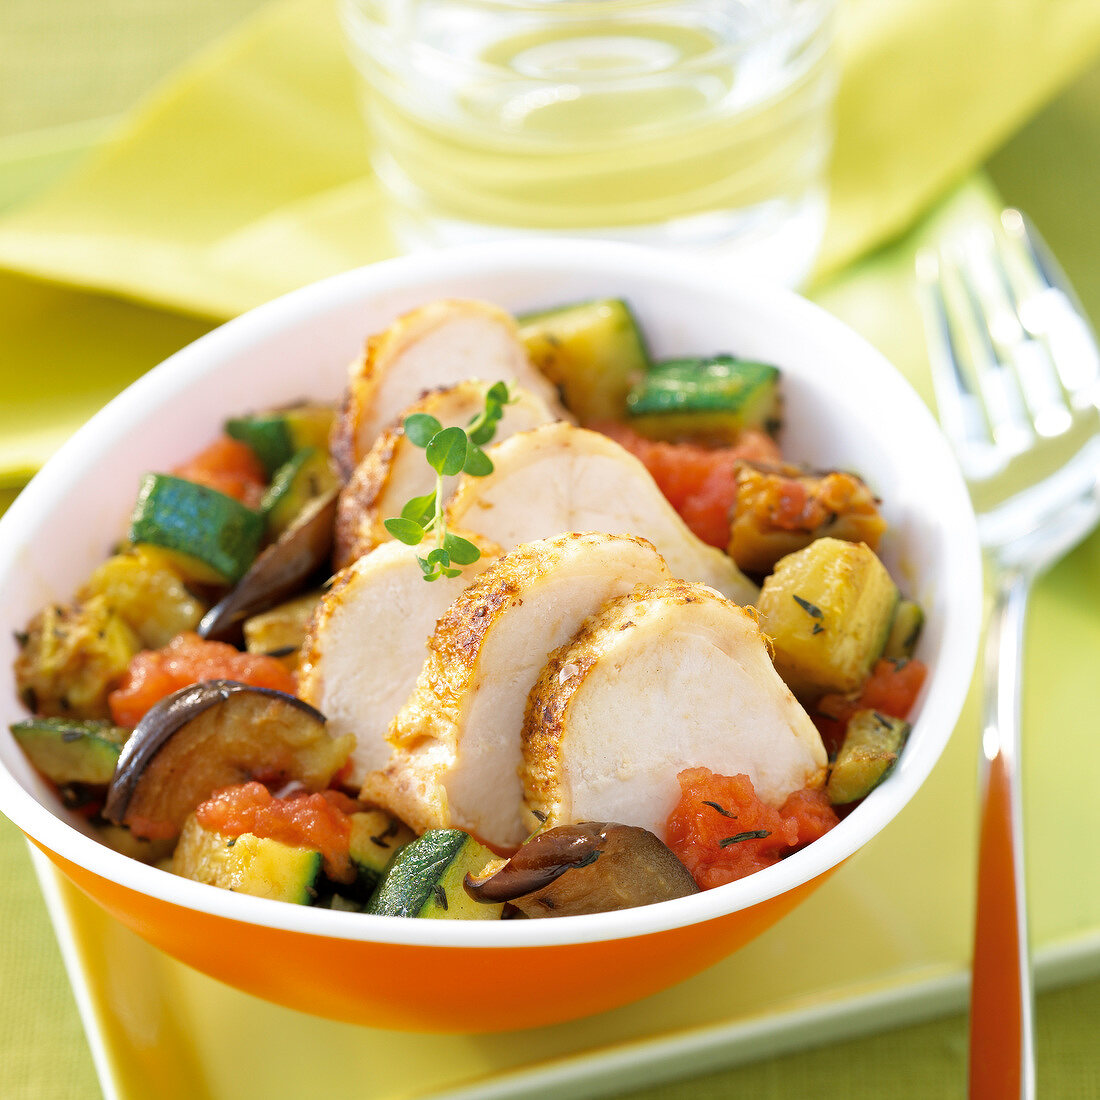 Spicy chicken breasts with ratatouille